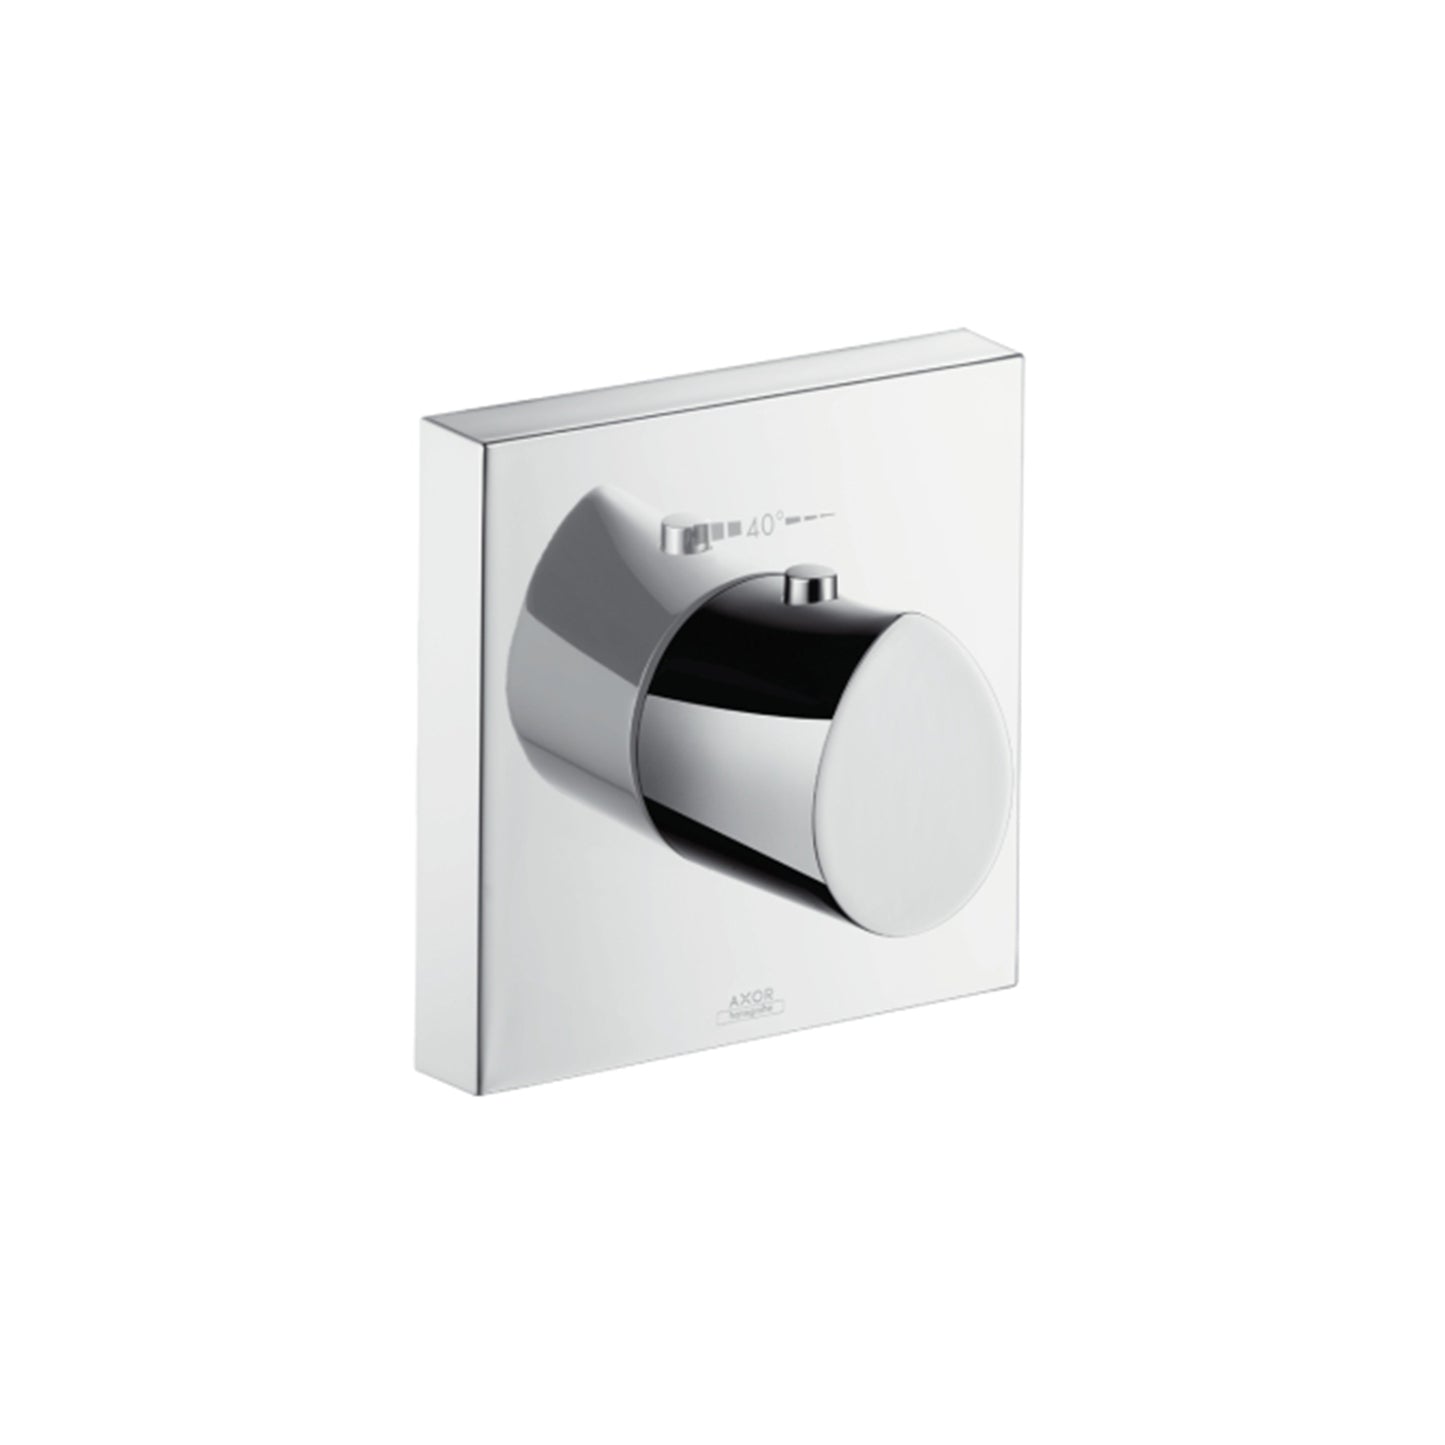 Axor Organic Finish set 12x12 for concealed highflow thermostatic module, Chrome 12712.000.